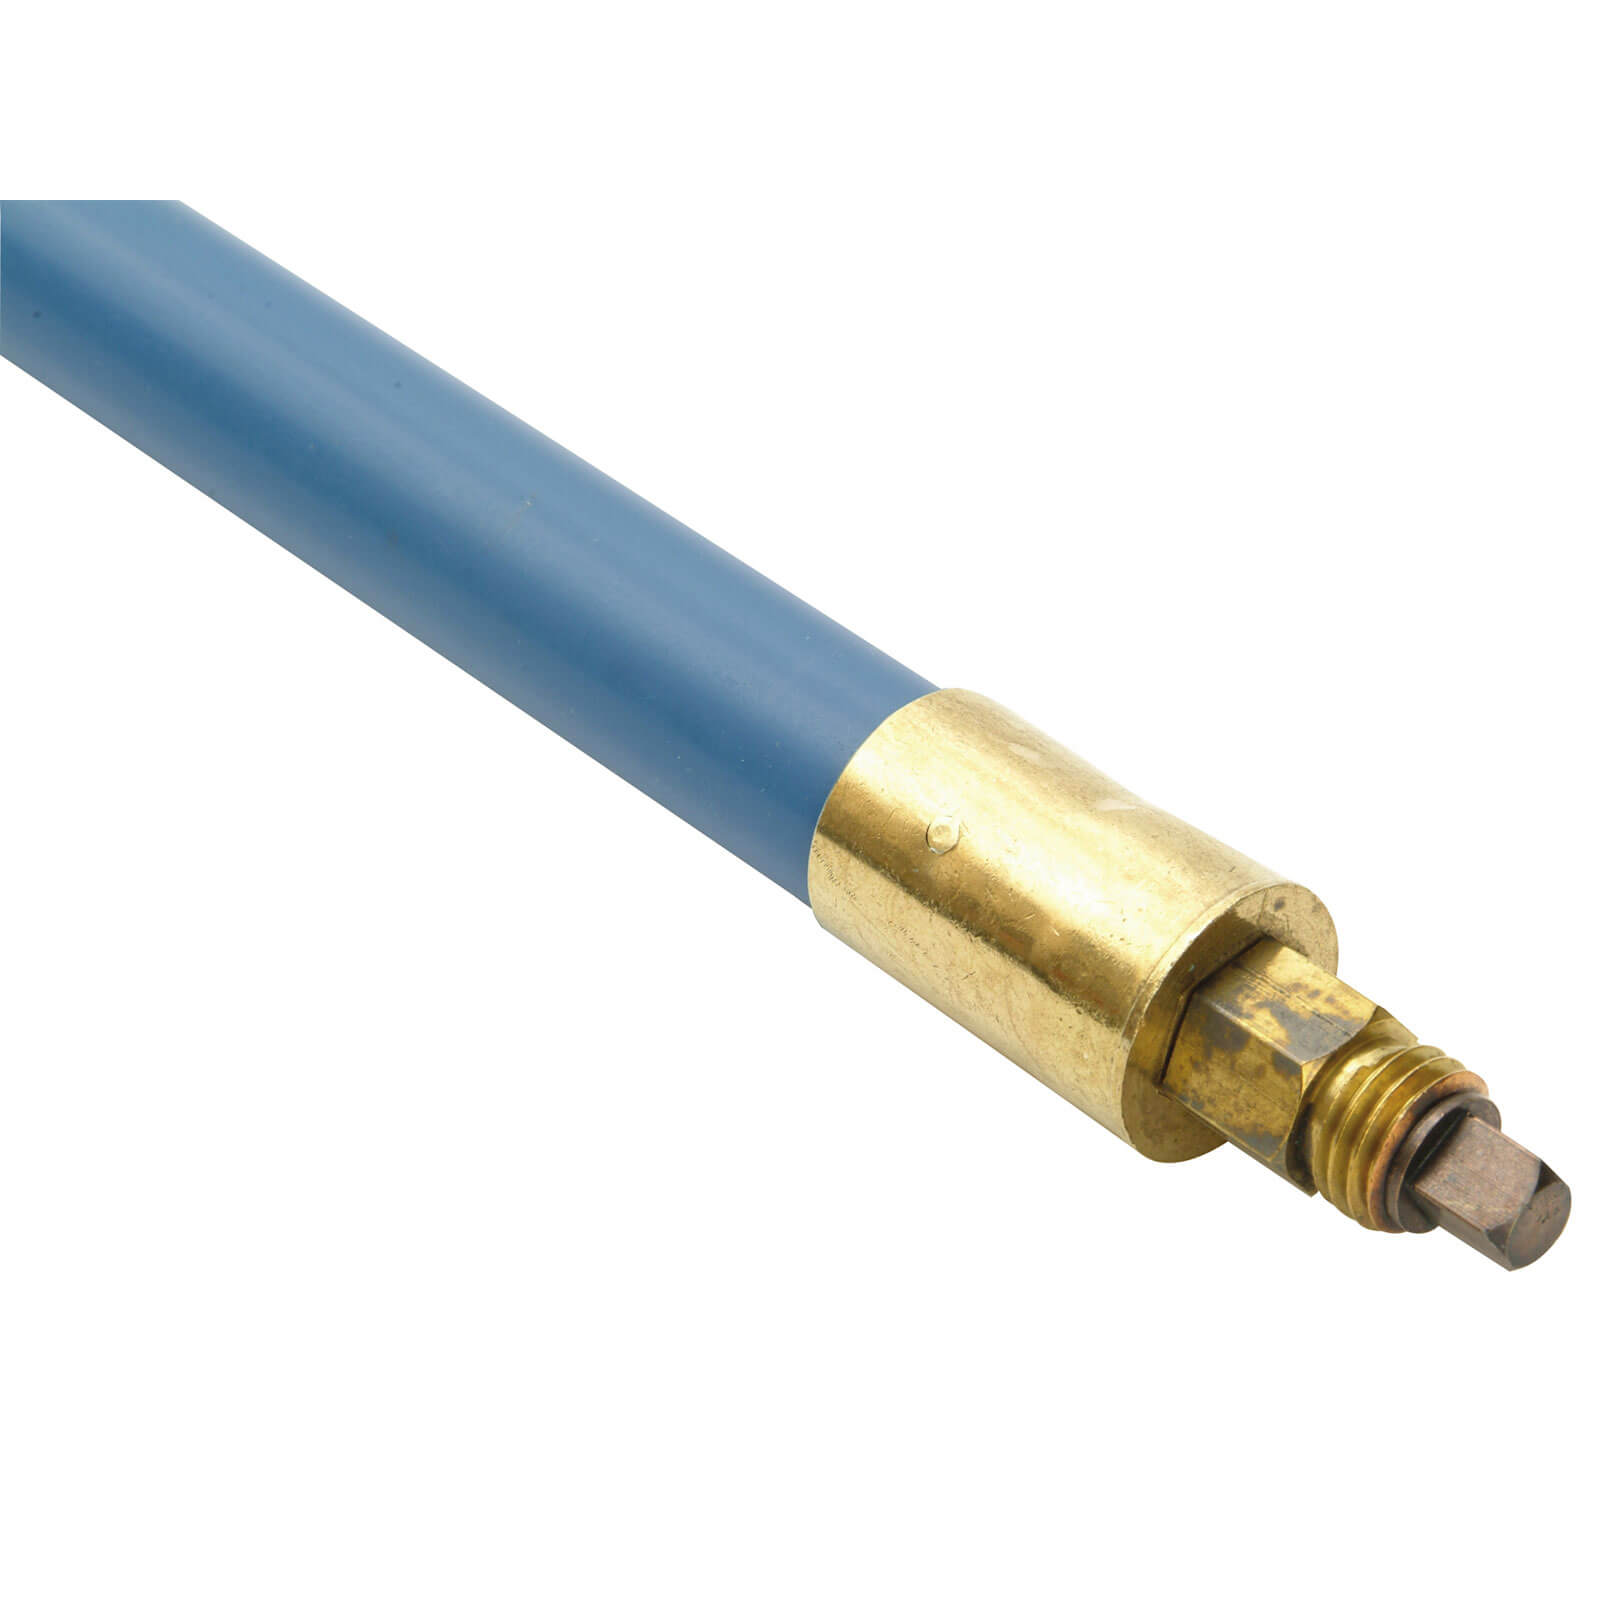 Image of Bailey Lockfast Blue Poly Drain Cleaning Rod 22mm 900mm